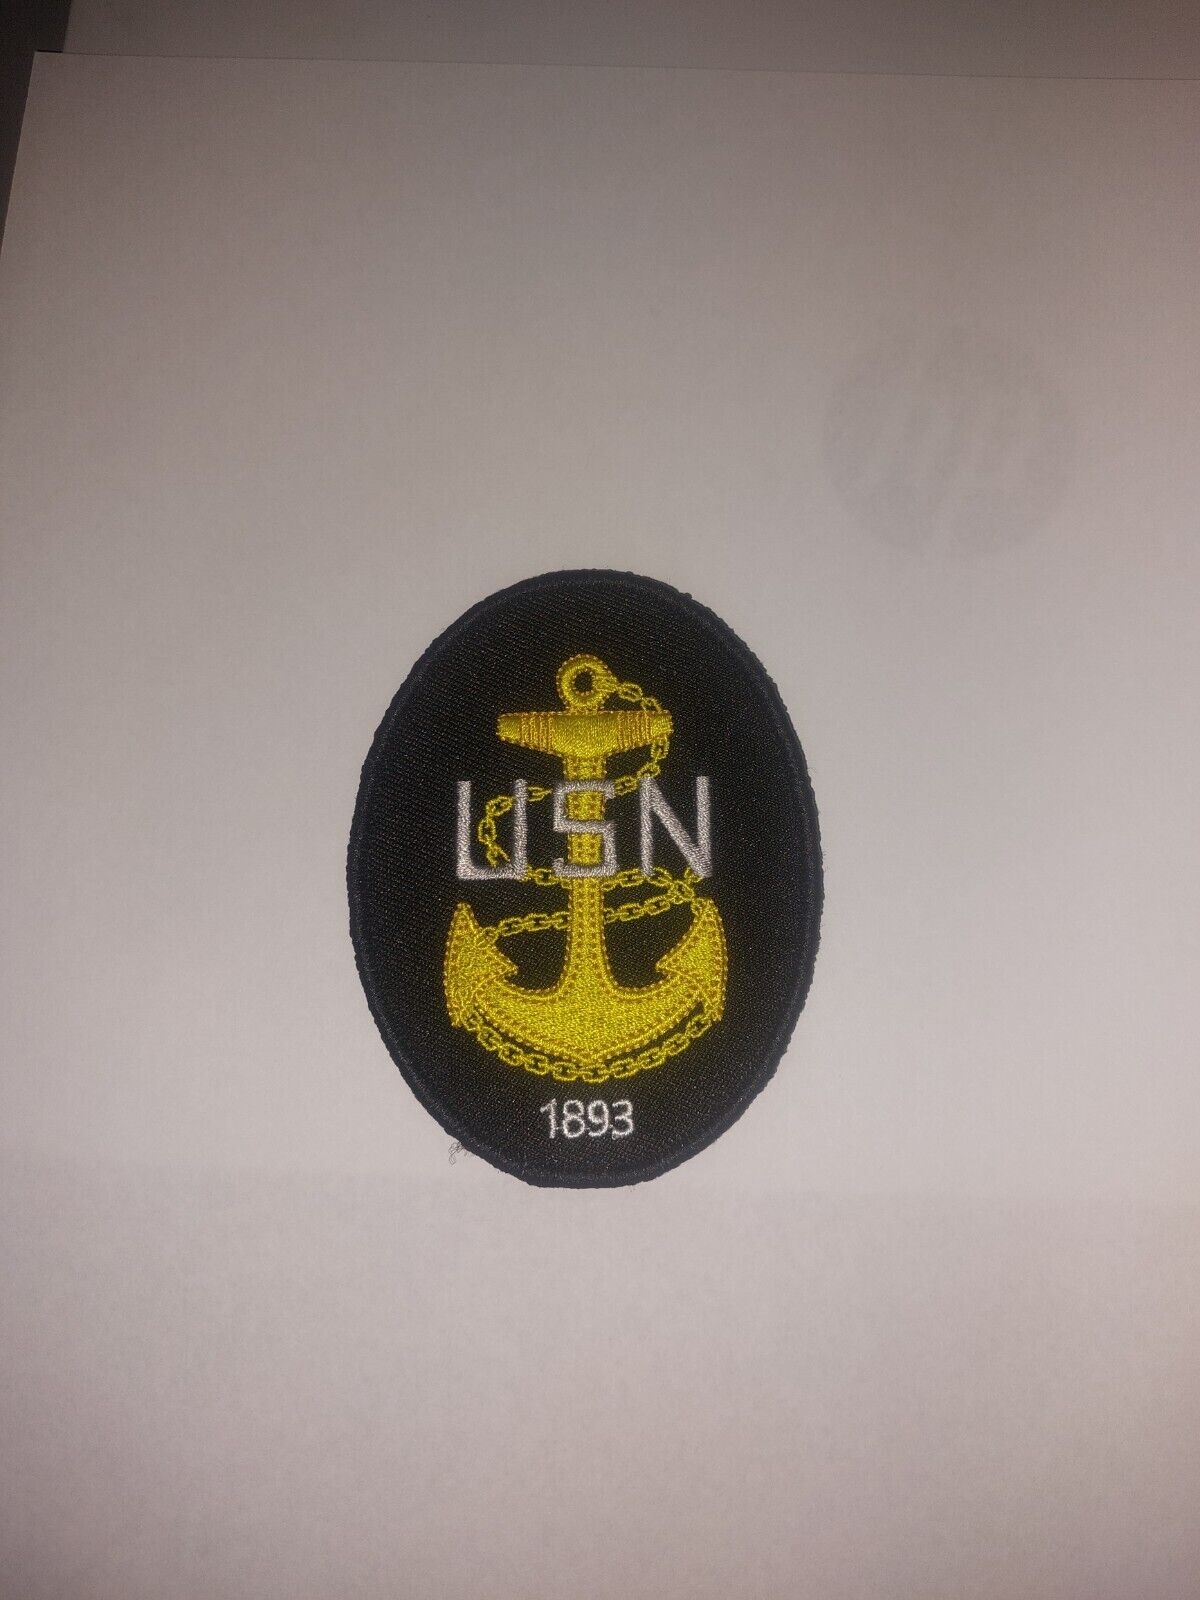 Chief Petty Officer patch USN CPO E-7 Navy 5 1/4 x 3 5/8